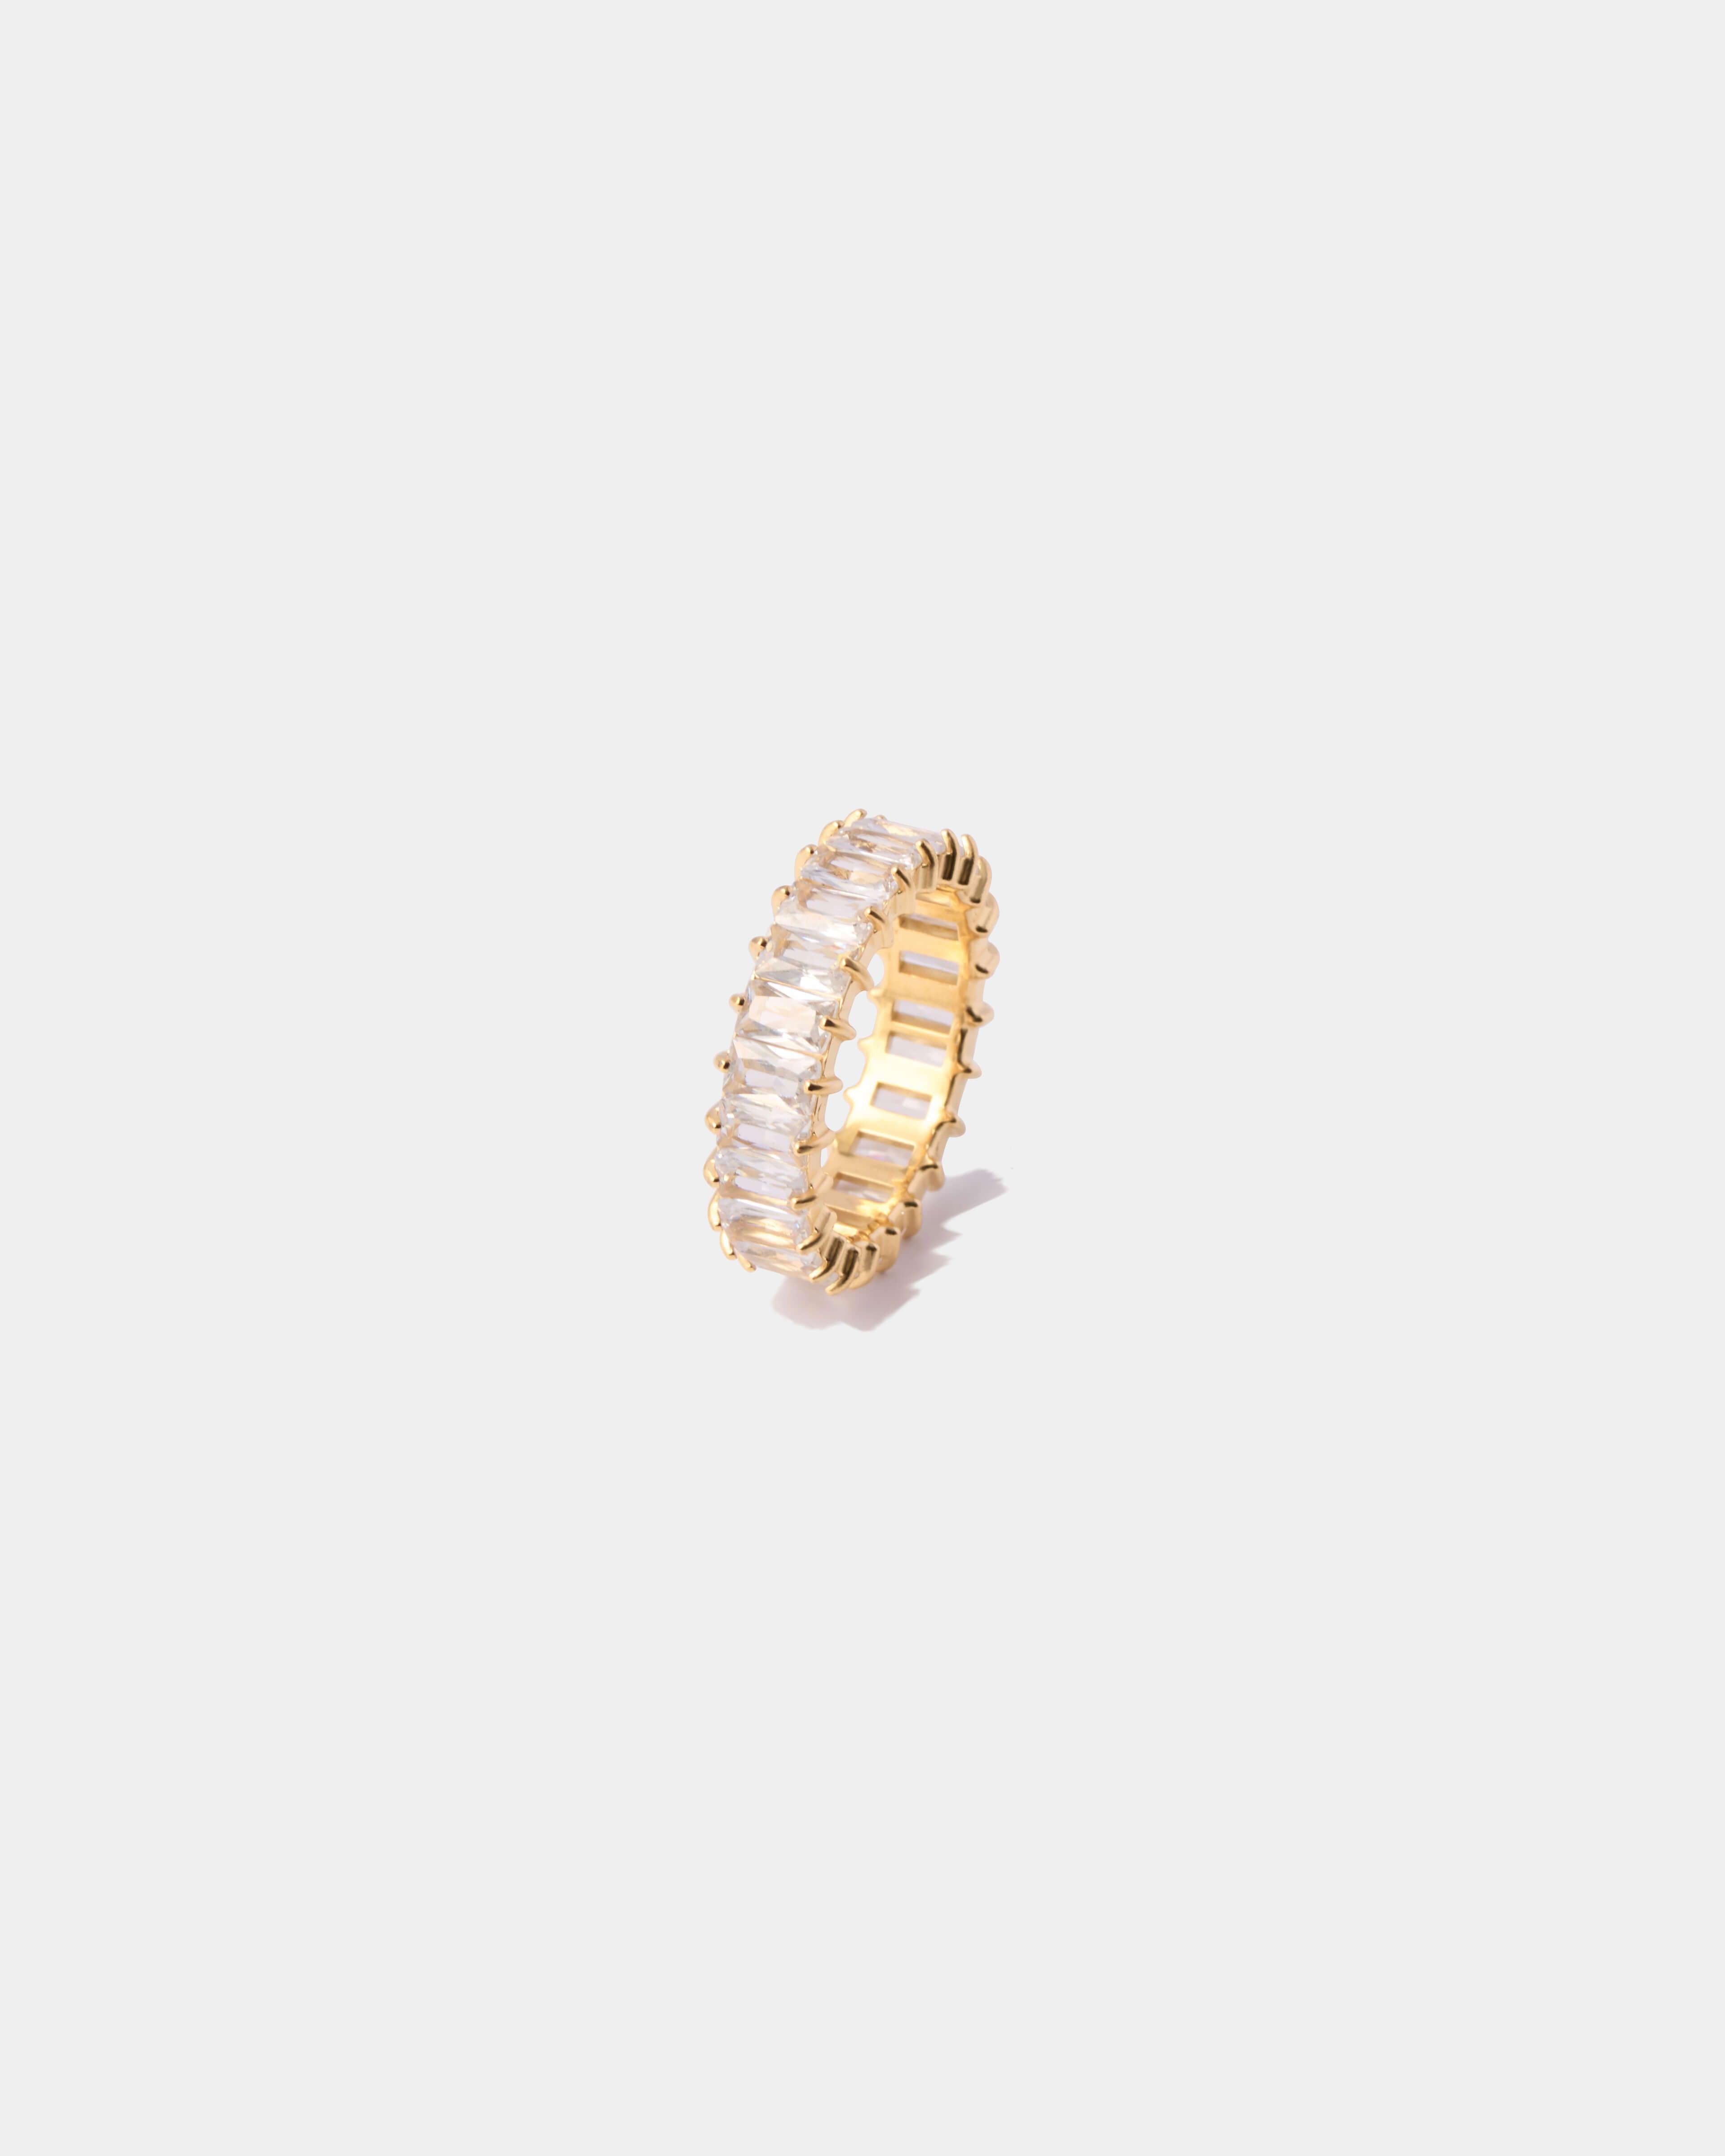 ZIRCONIA ARRAY RING - THE LIMELY